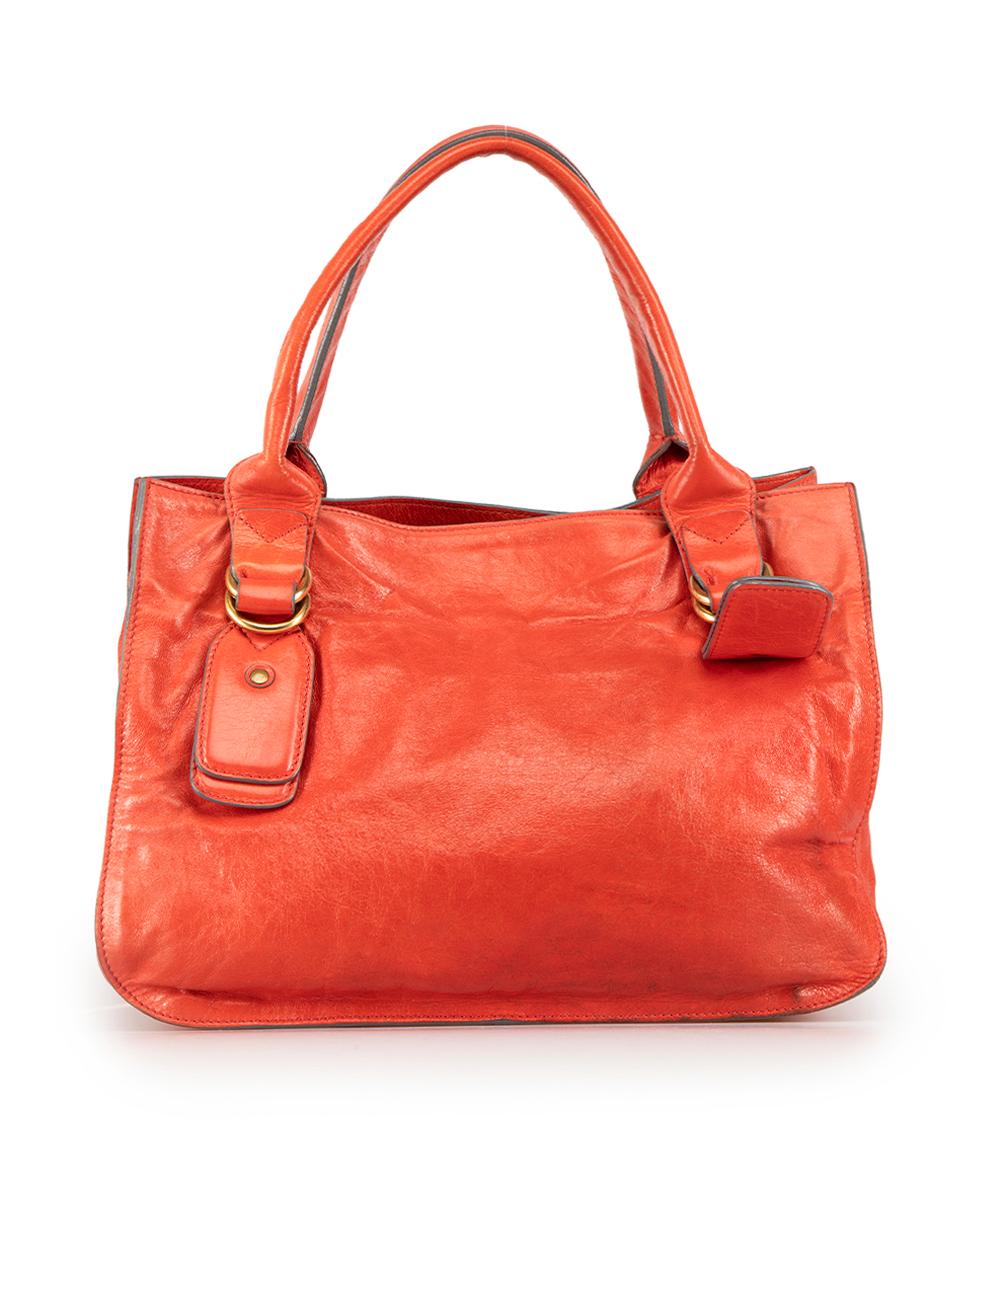 Chloé Red Leather Bay Quilted Bag In Good Condition For Sale In London, GB